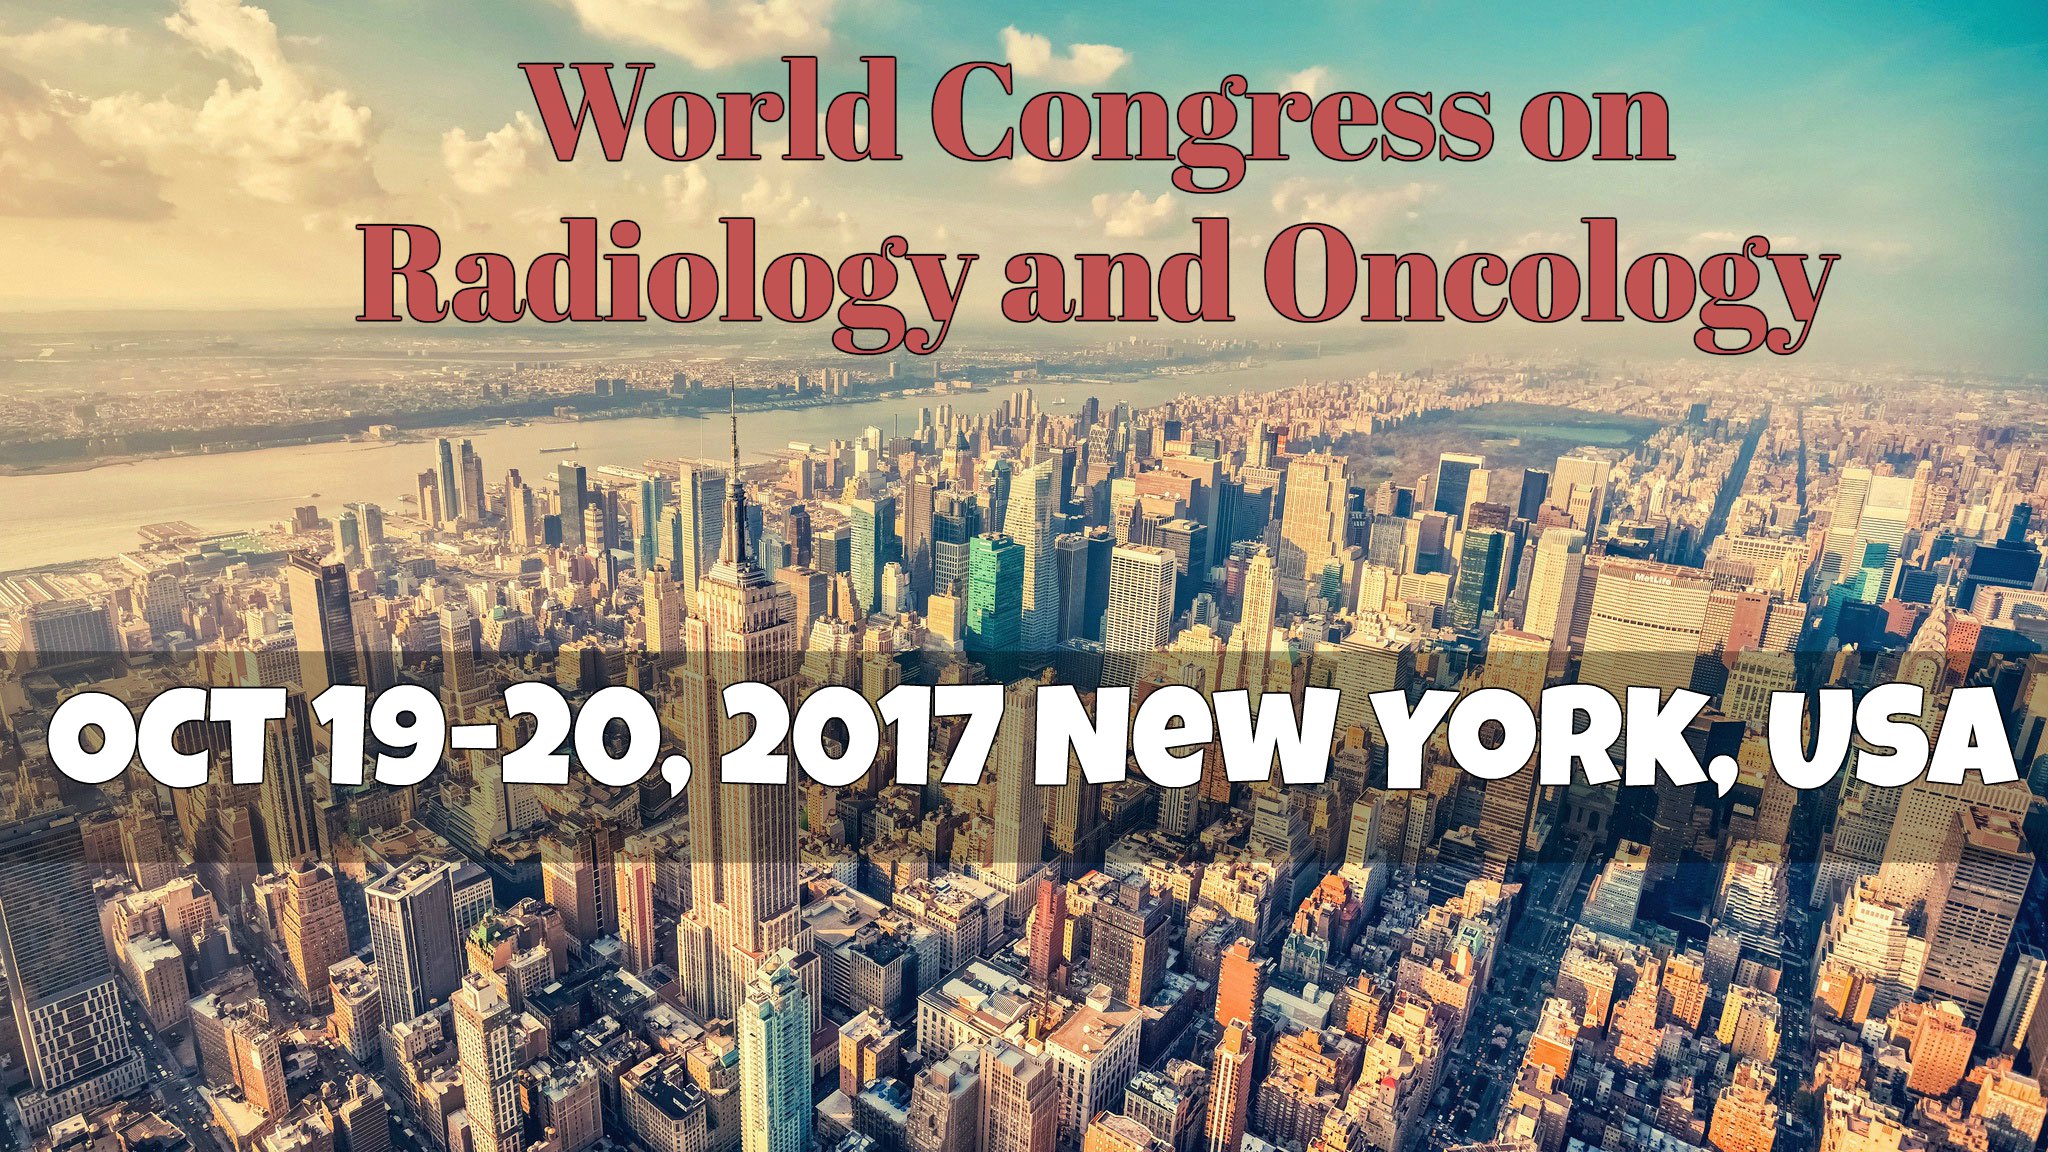 Conferences invites all the participants from all over the world to attend World Congress on Radiology & Oncology during October 19-20, 2017 in New York, USA which includes prompt Keynote presentations, Oral talks, Poster presentations and Exhibitions.